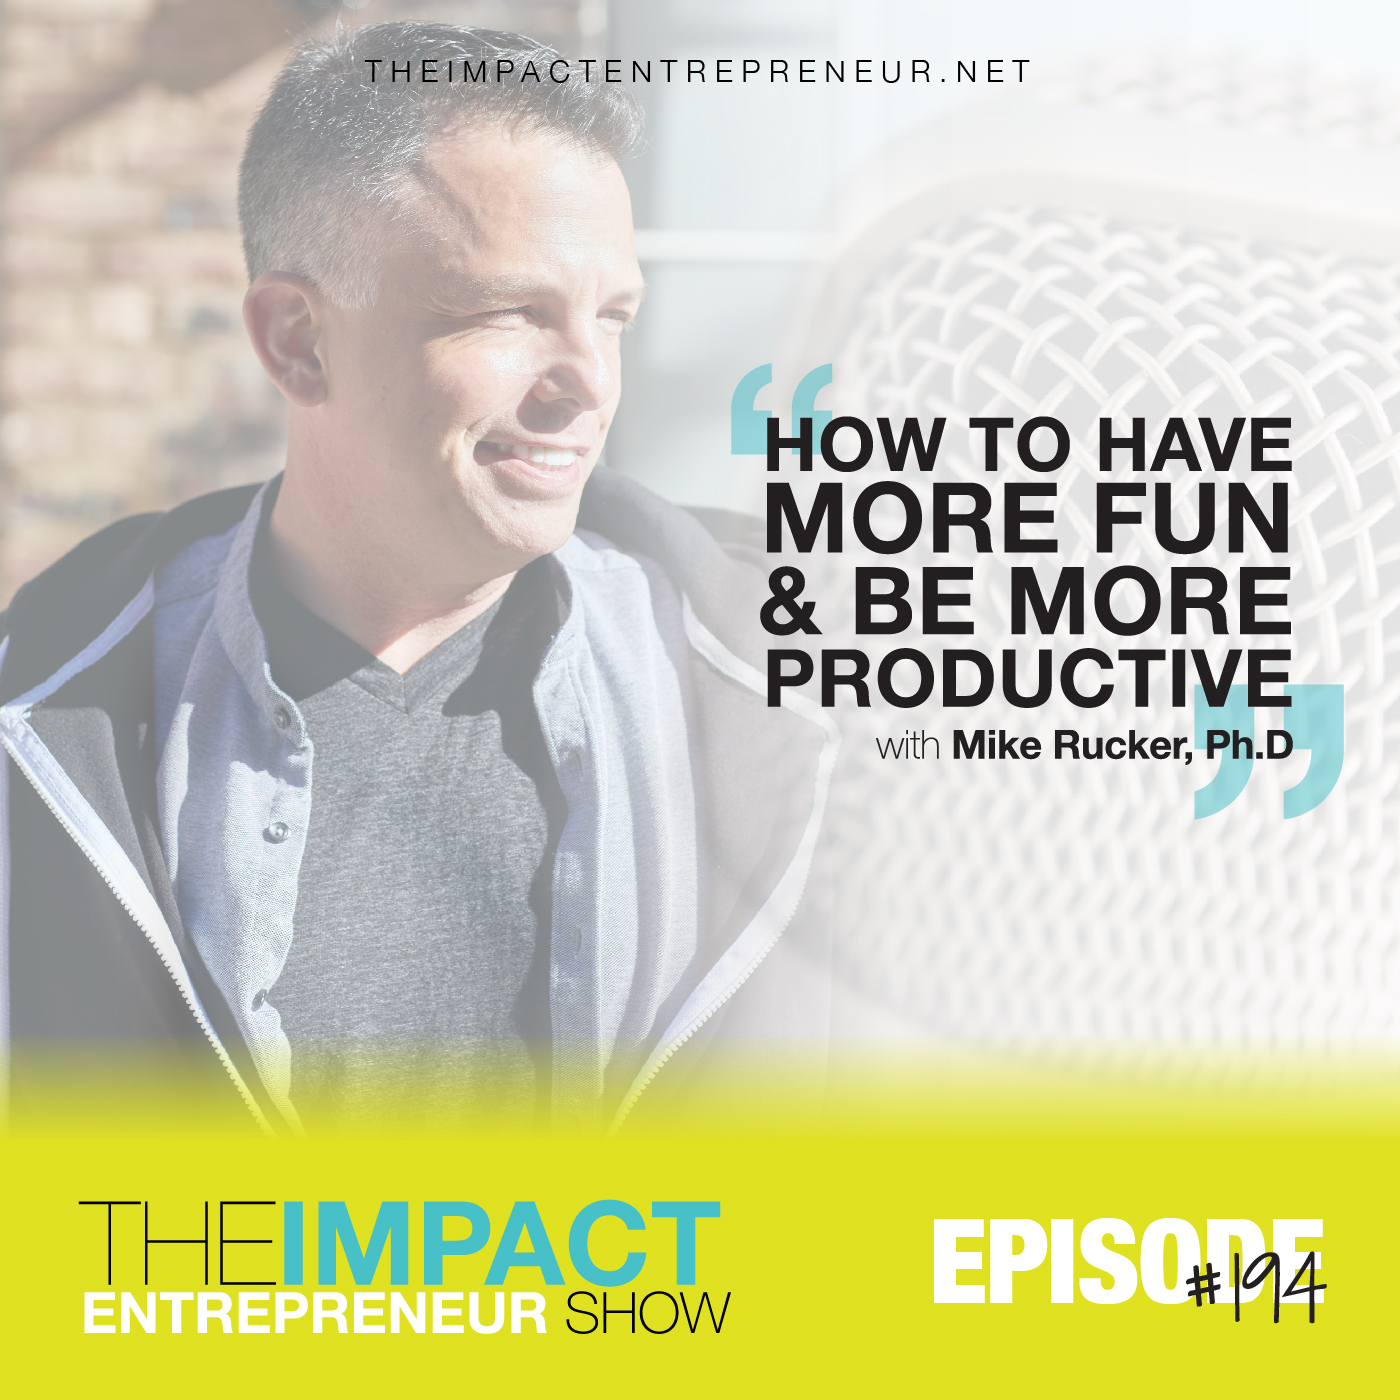 Ep. 194 - How to Have More Fun & Be More Productive - with Mike Rucker, Ph.D